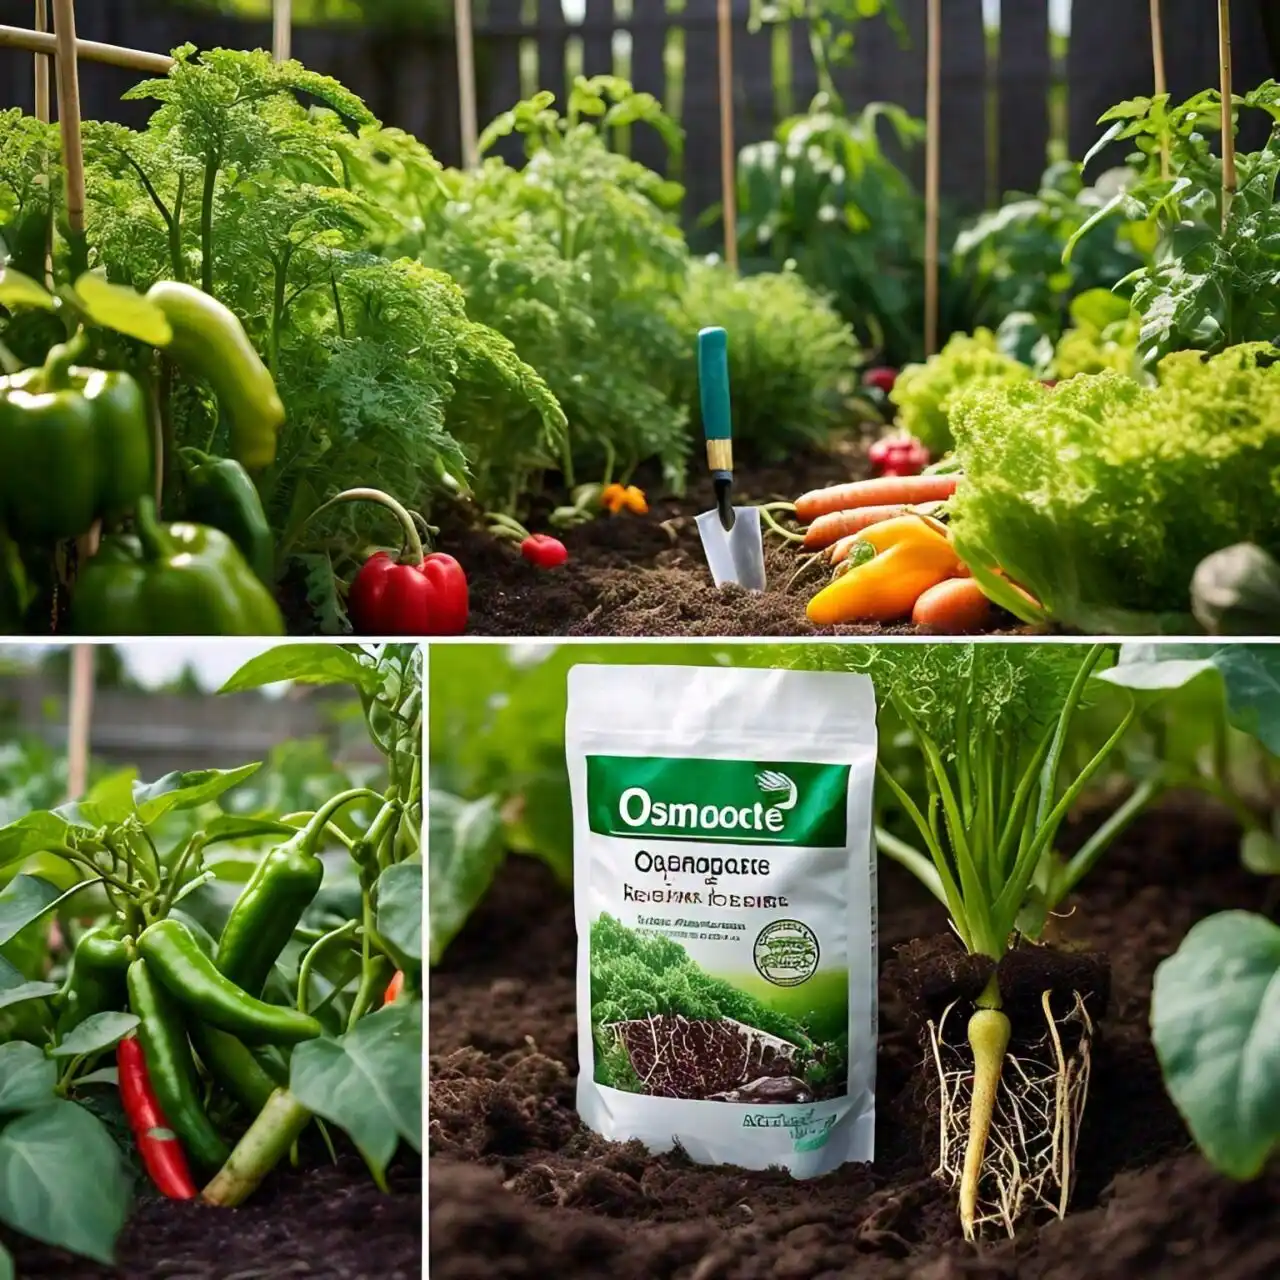 bag of Osmocote fertilizer with a seal of approval for organic gardening